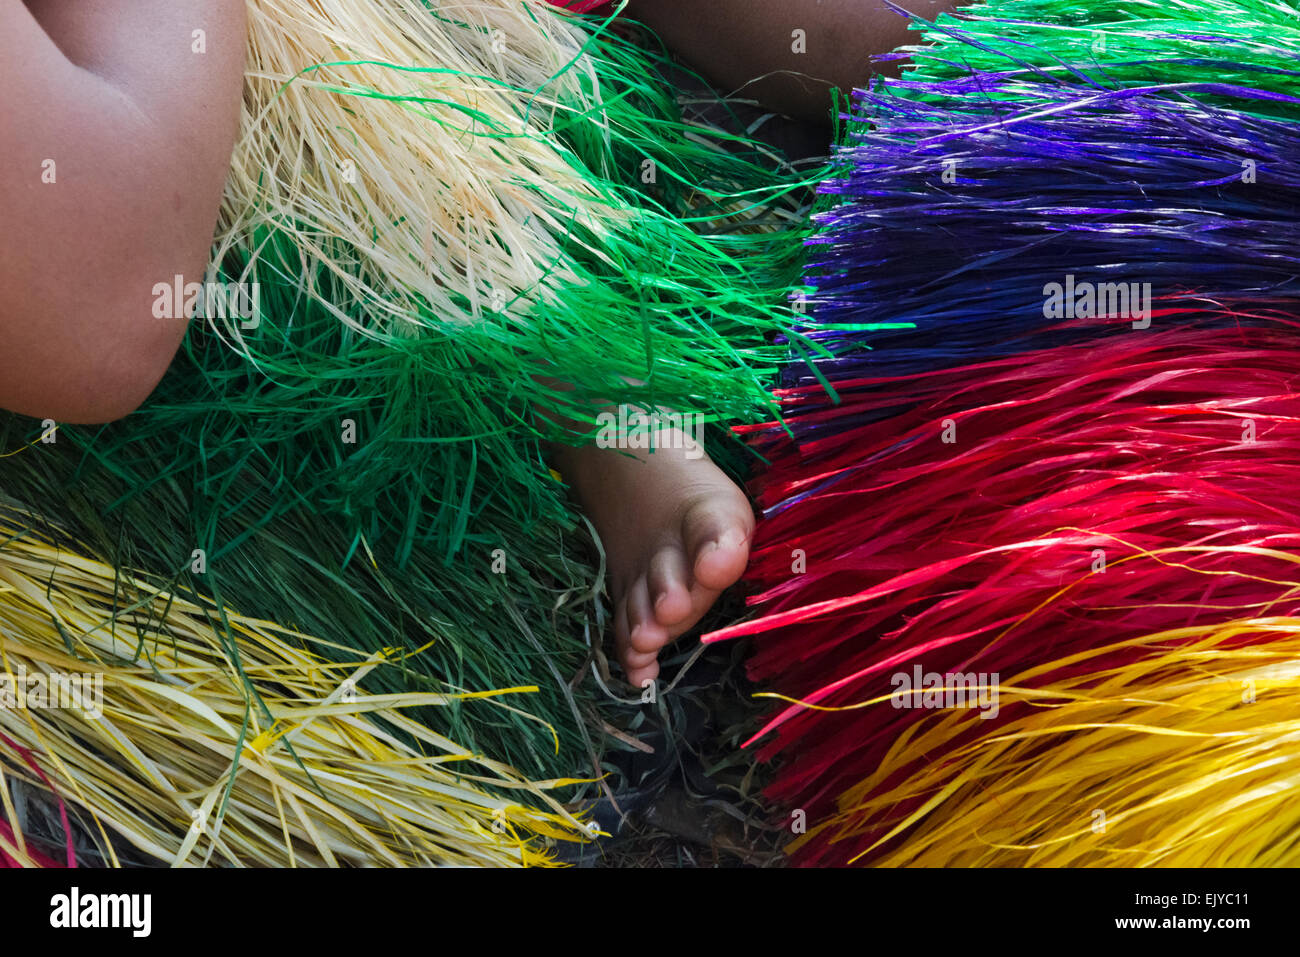 Yapese girl's grass skirt, Yap Island, Federated States of Micronesia Stock Photo